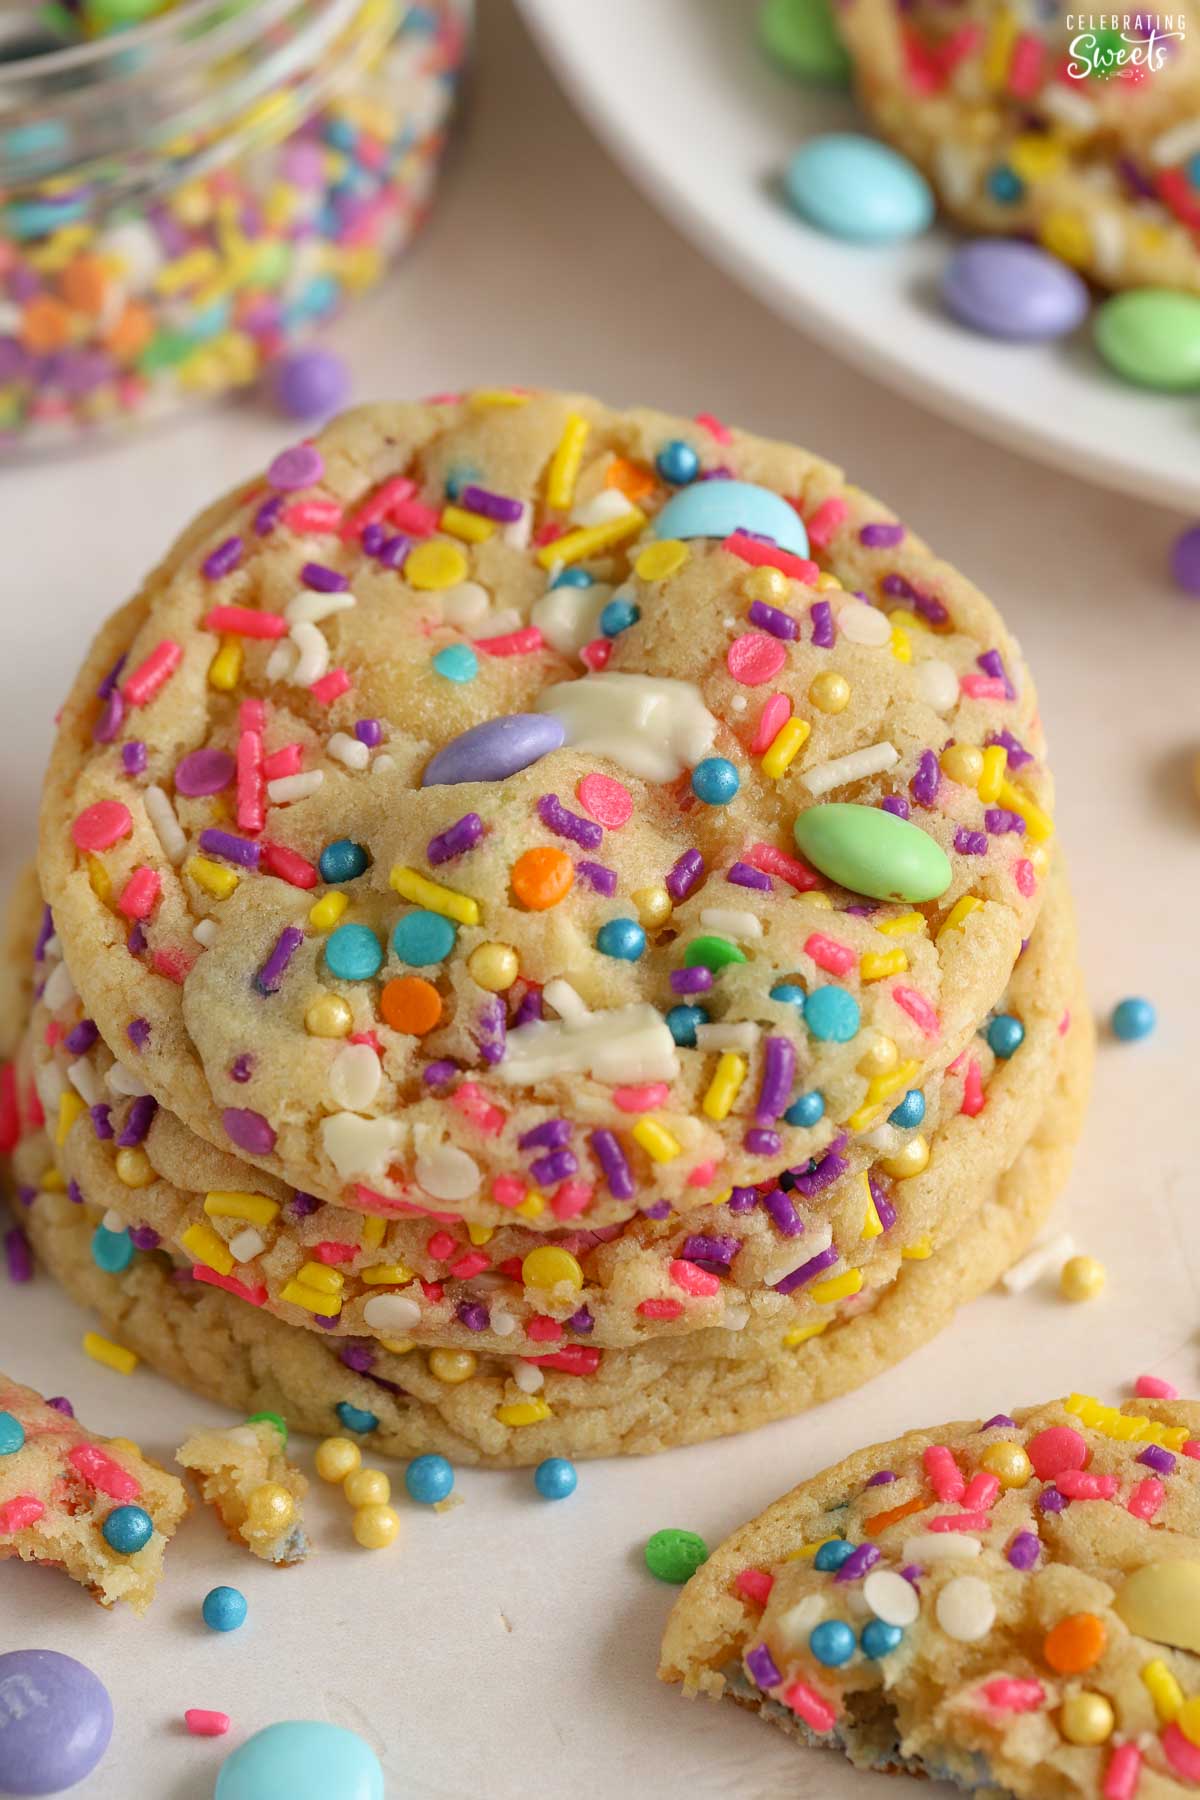 Stack of three cookies topped with pastel M&M's and sprinkles.